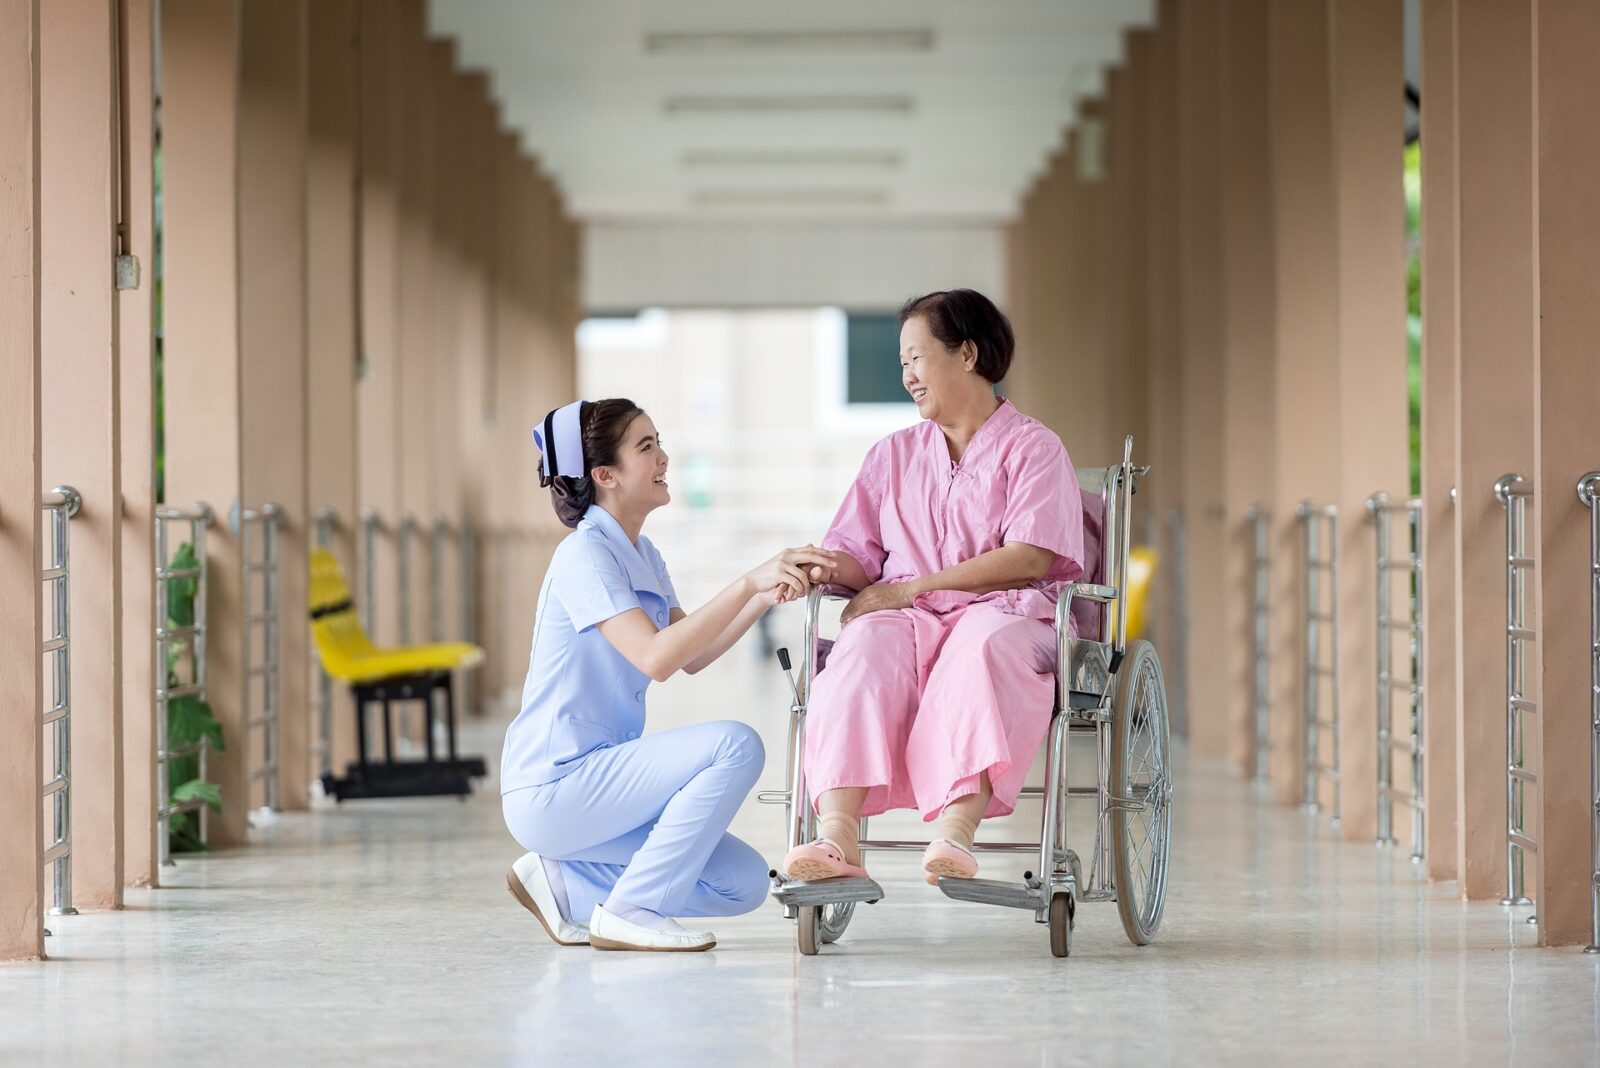 improving customer experience in healthcare